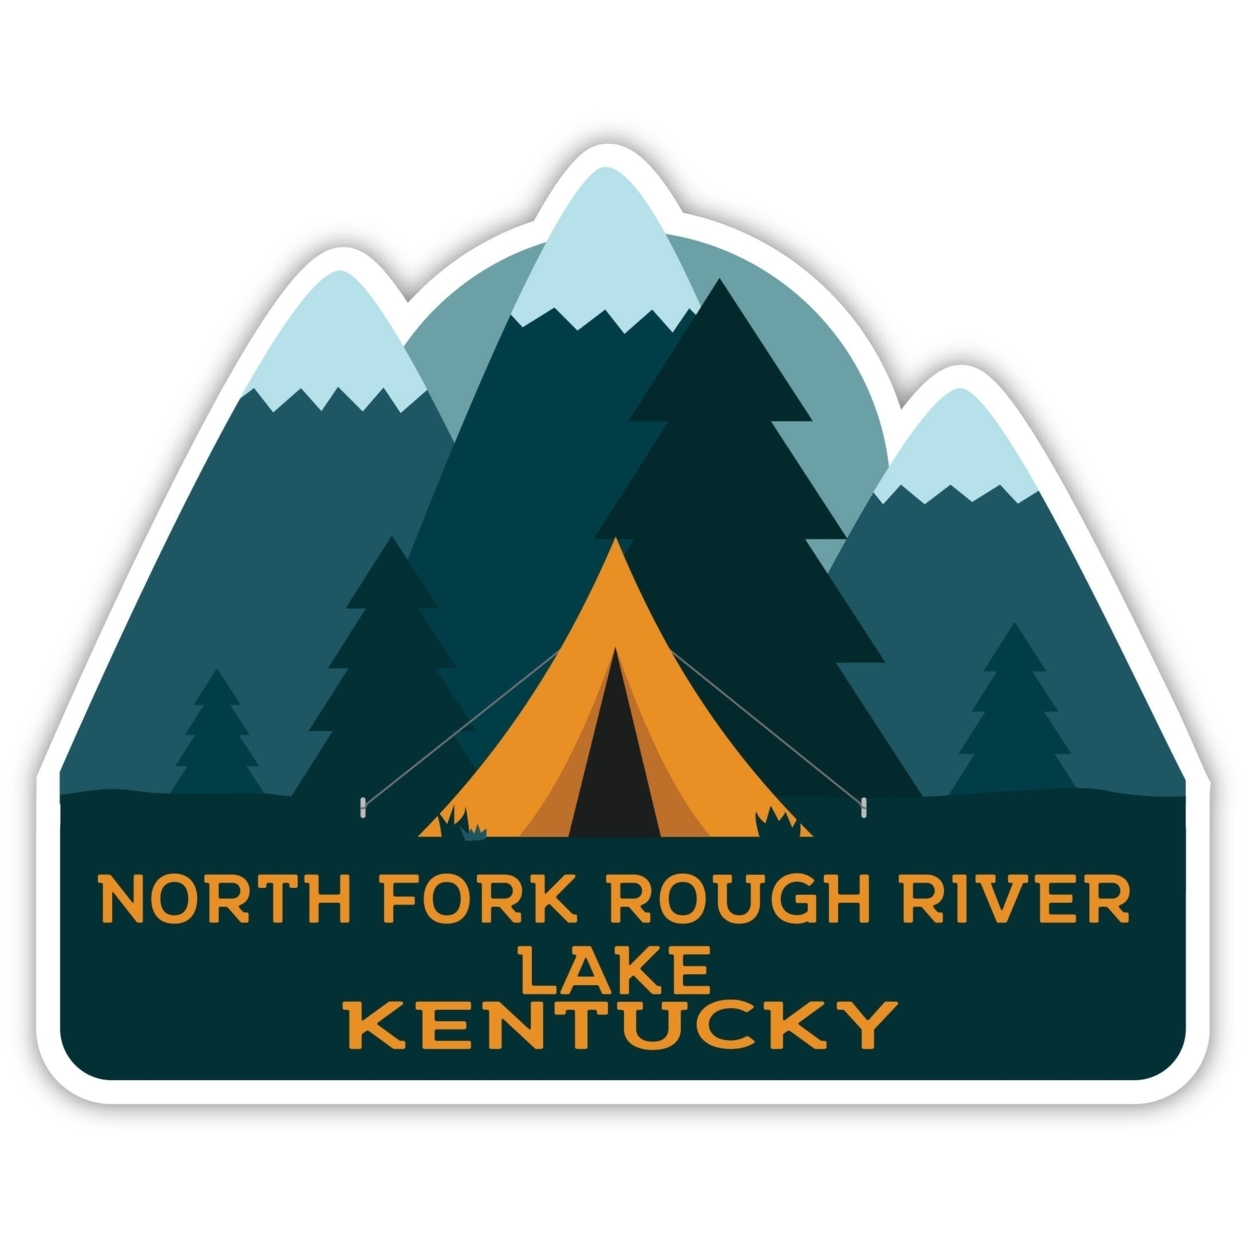 North Fork Rough River Lake Kentucky Souvenir Decorative Stickers (Choose Theme And Size) - Single Unit, 4-Inch, Tent